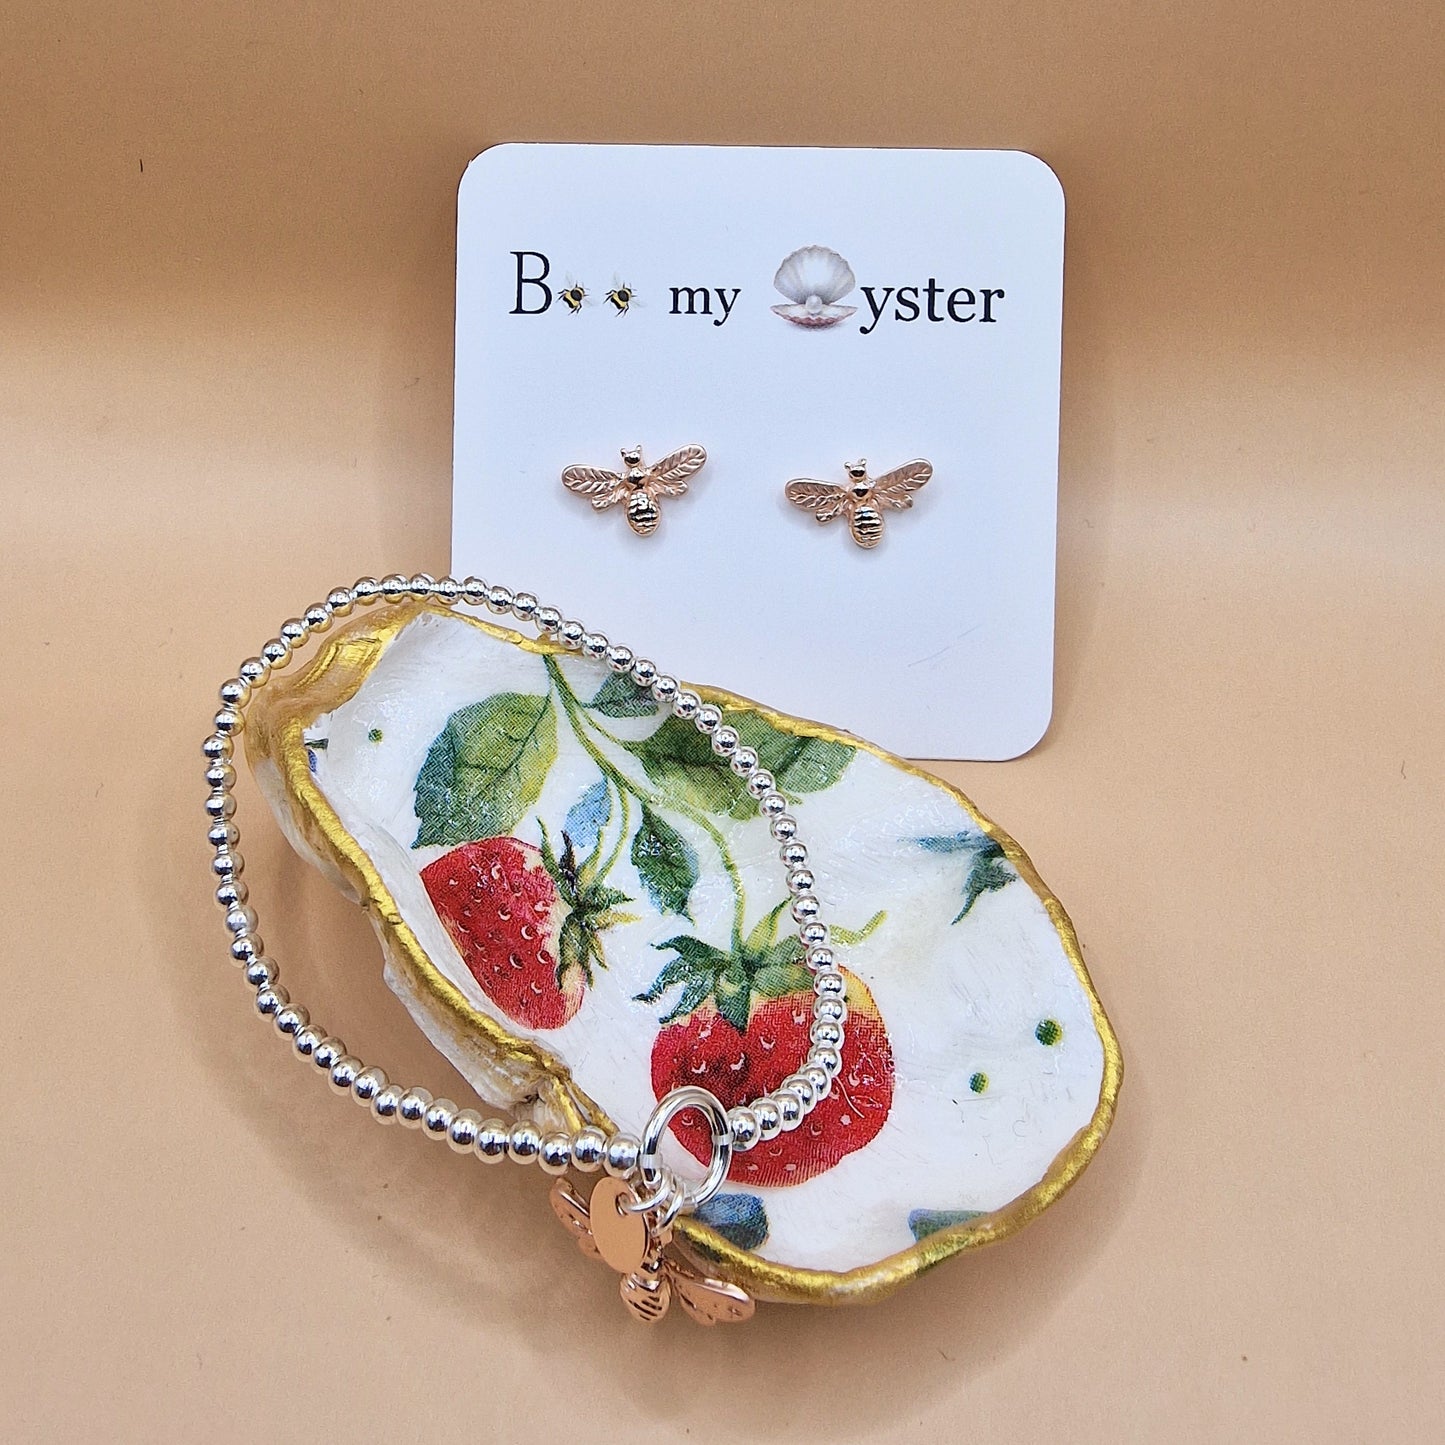 Strawberry Small Oyster Shell Trinket Dish